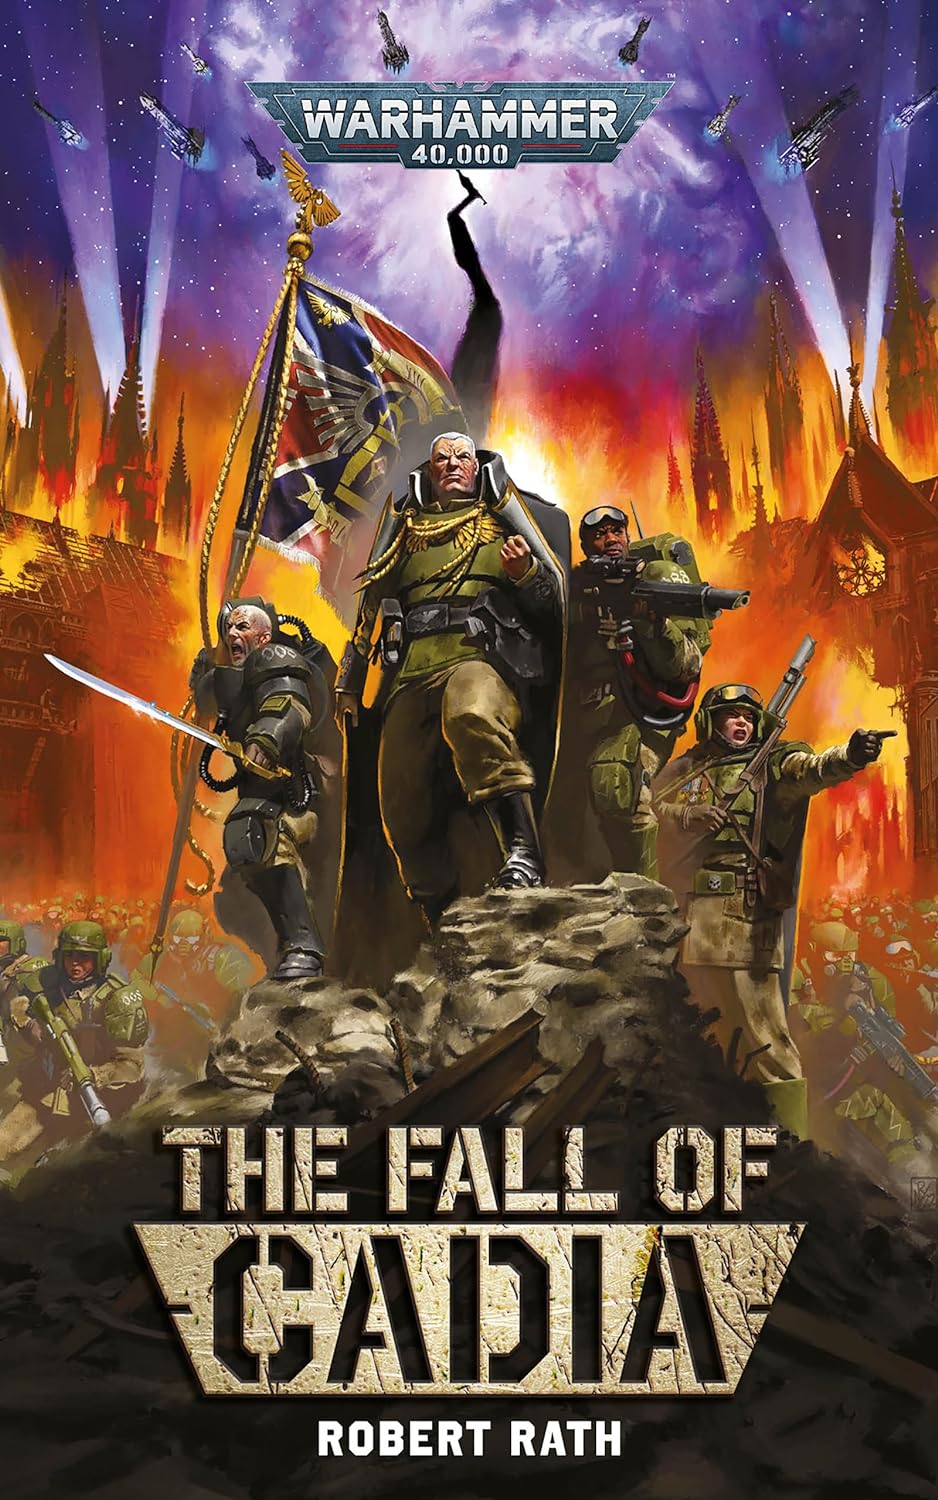 Warhammer 40,000 - The Fall of Cadia Cover